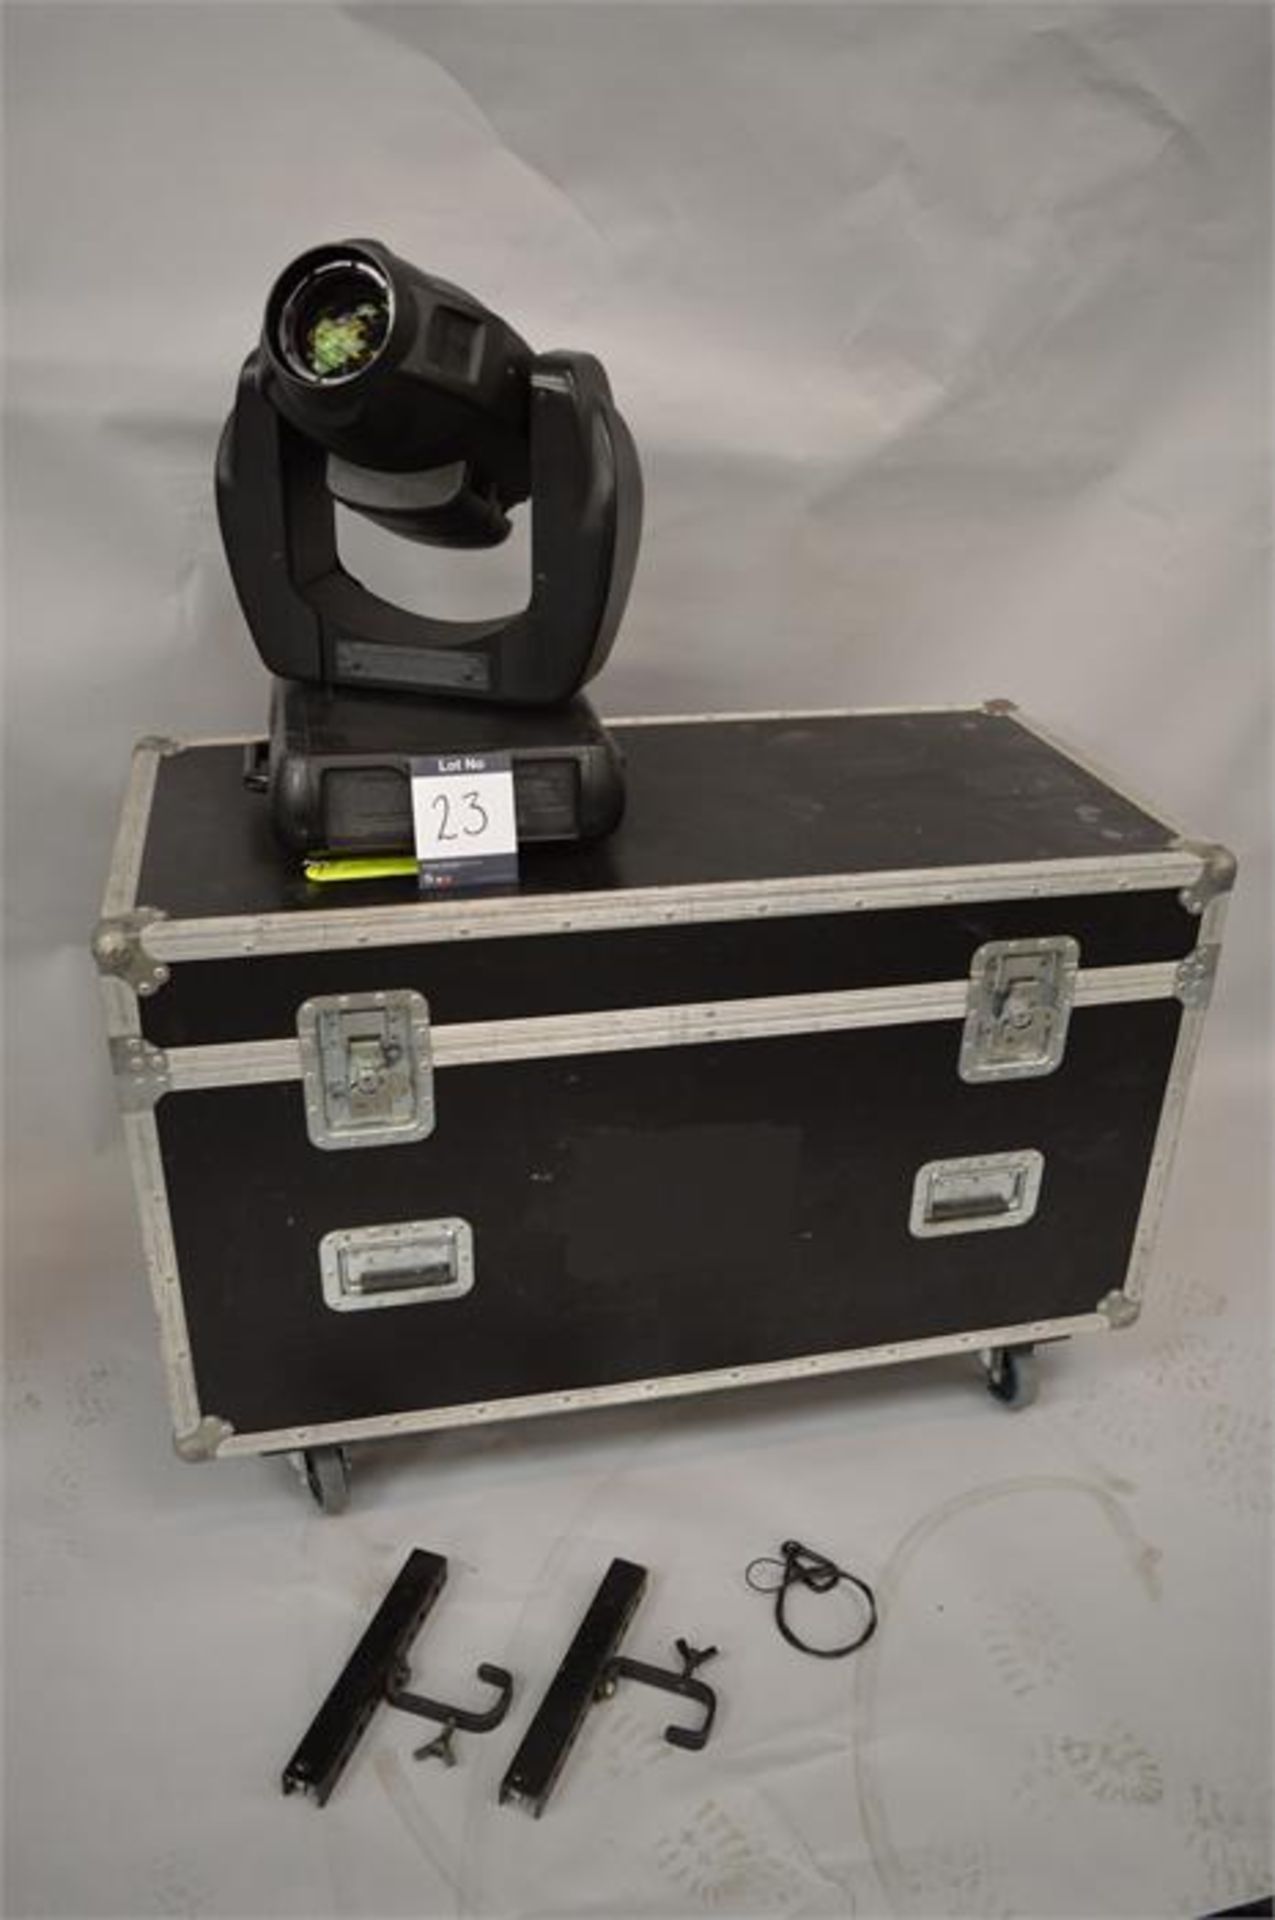 1 x Varilite, VL2000 Moving Head Spot Light with Flightcase and assoiated Brackets, as lotted (maybe - Image 3 of 4